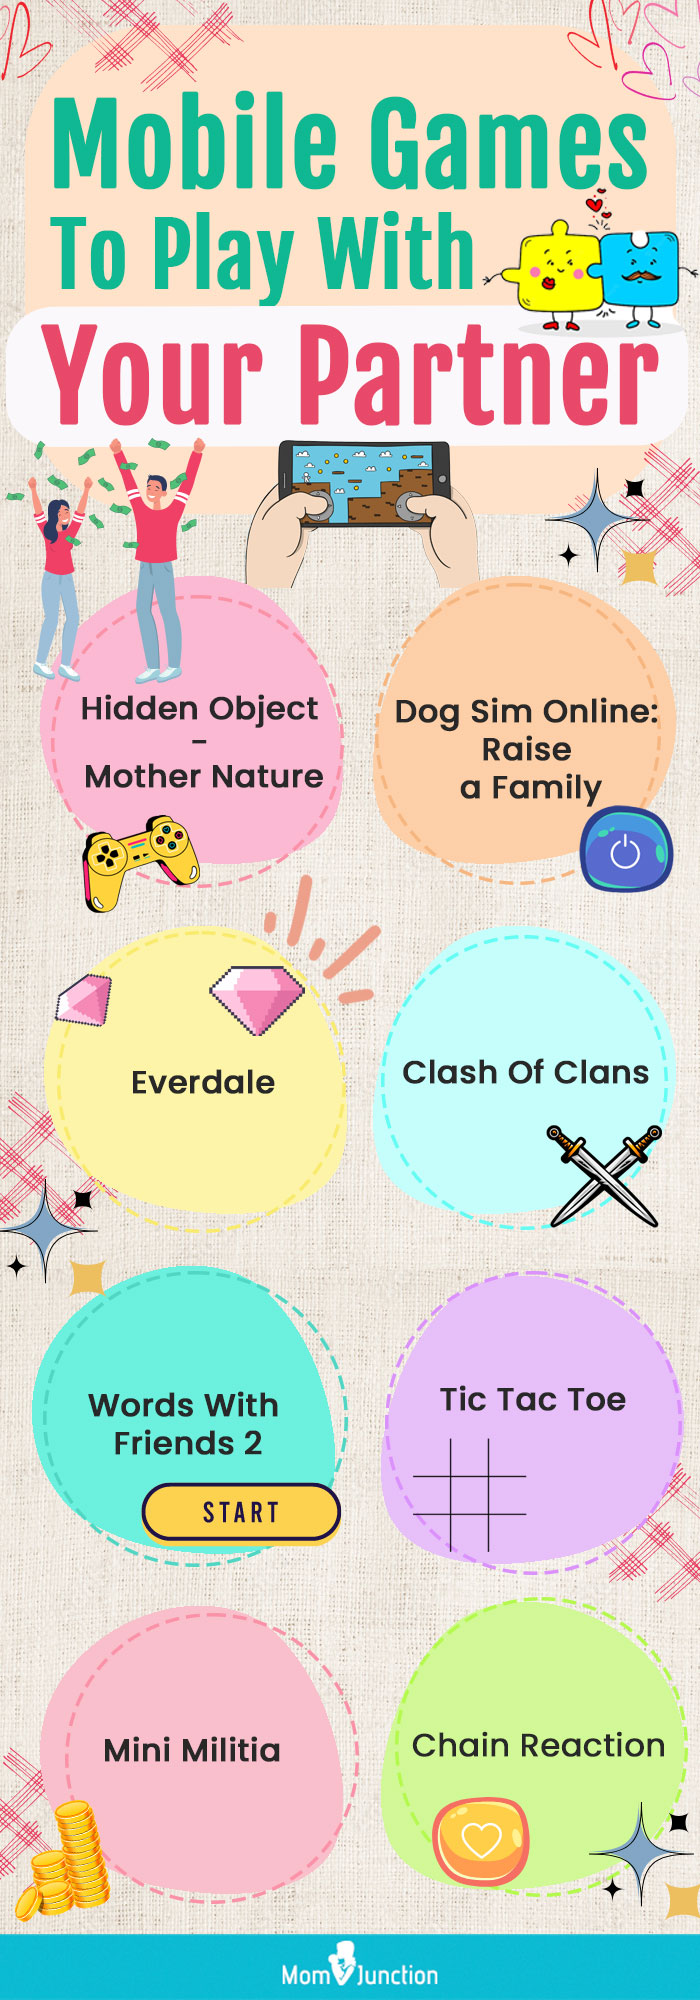 mobile games for couples (infographic)